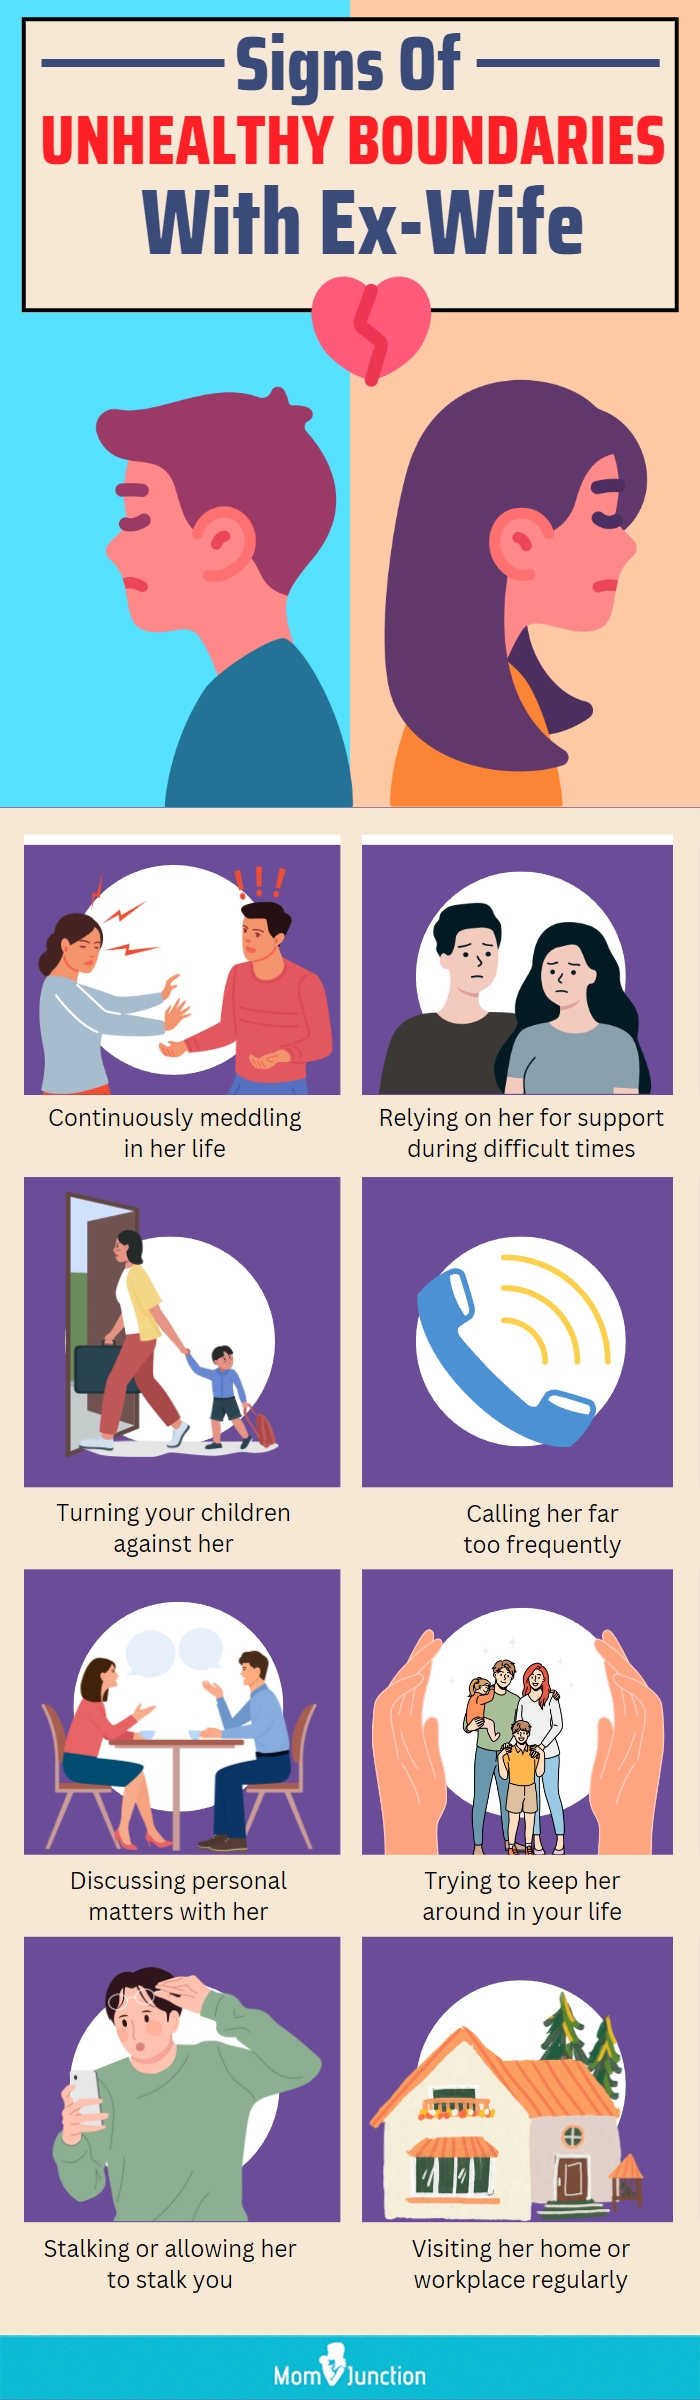 signs of unhealthy boundaries with ex wife(infographic)